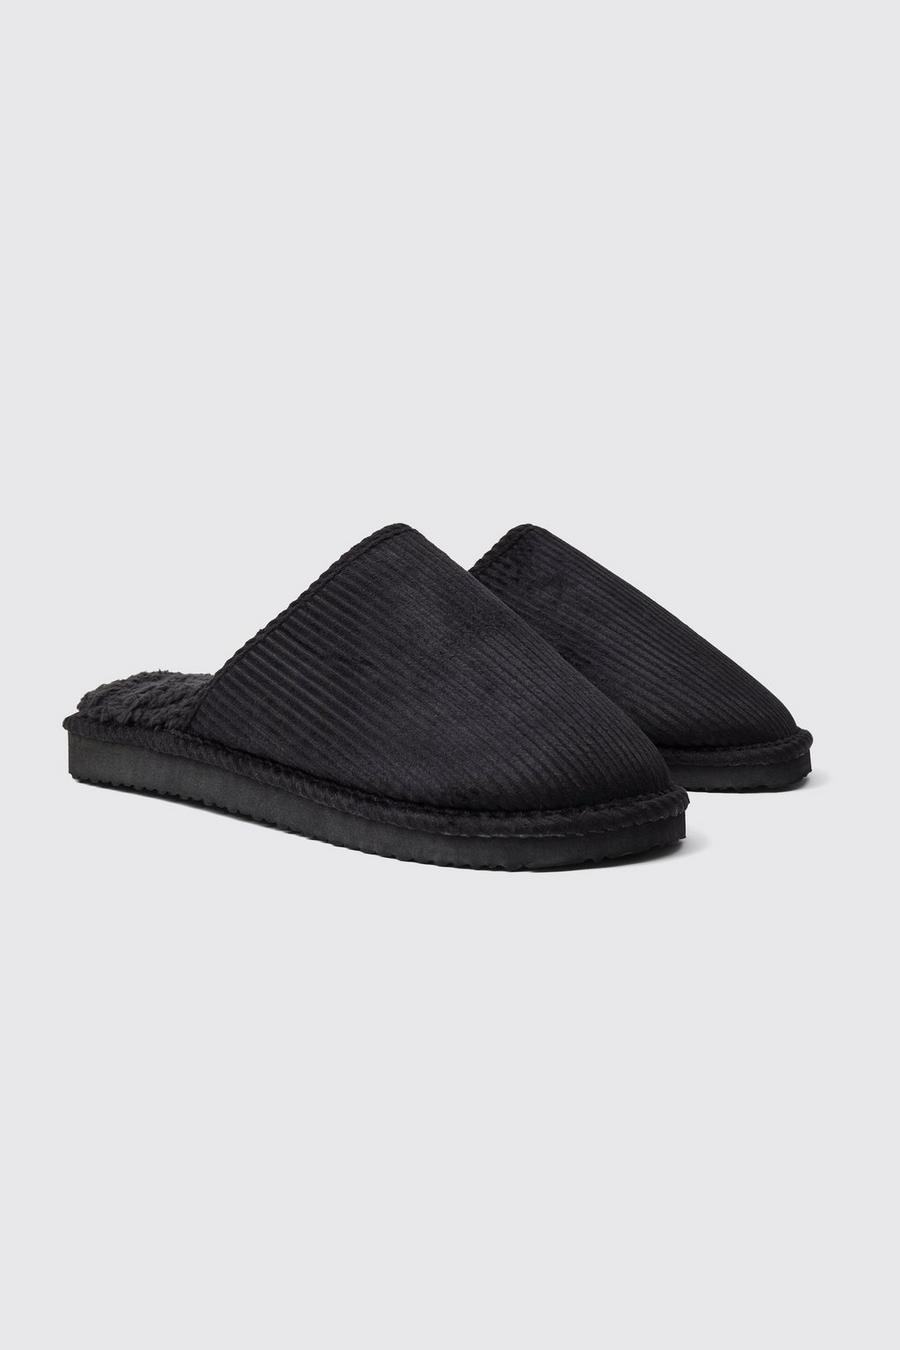 Black Cord Backless Slippers